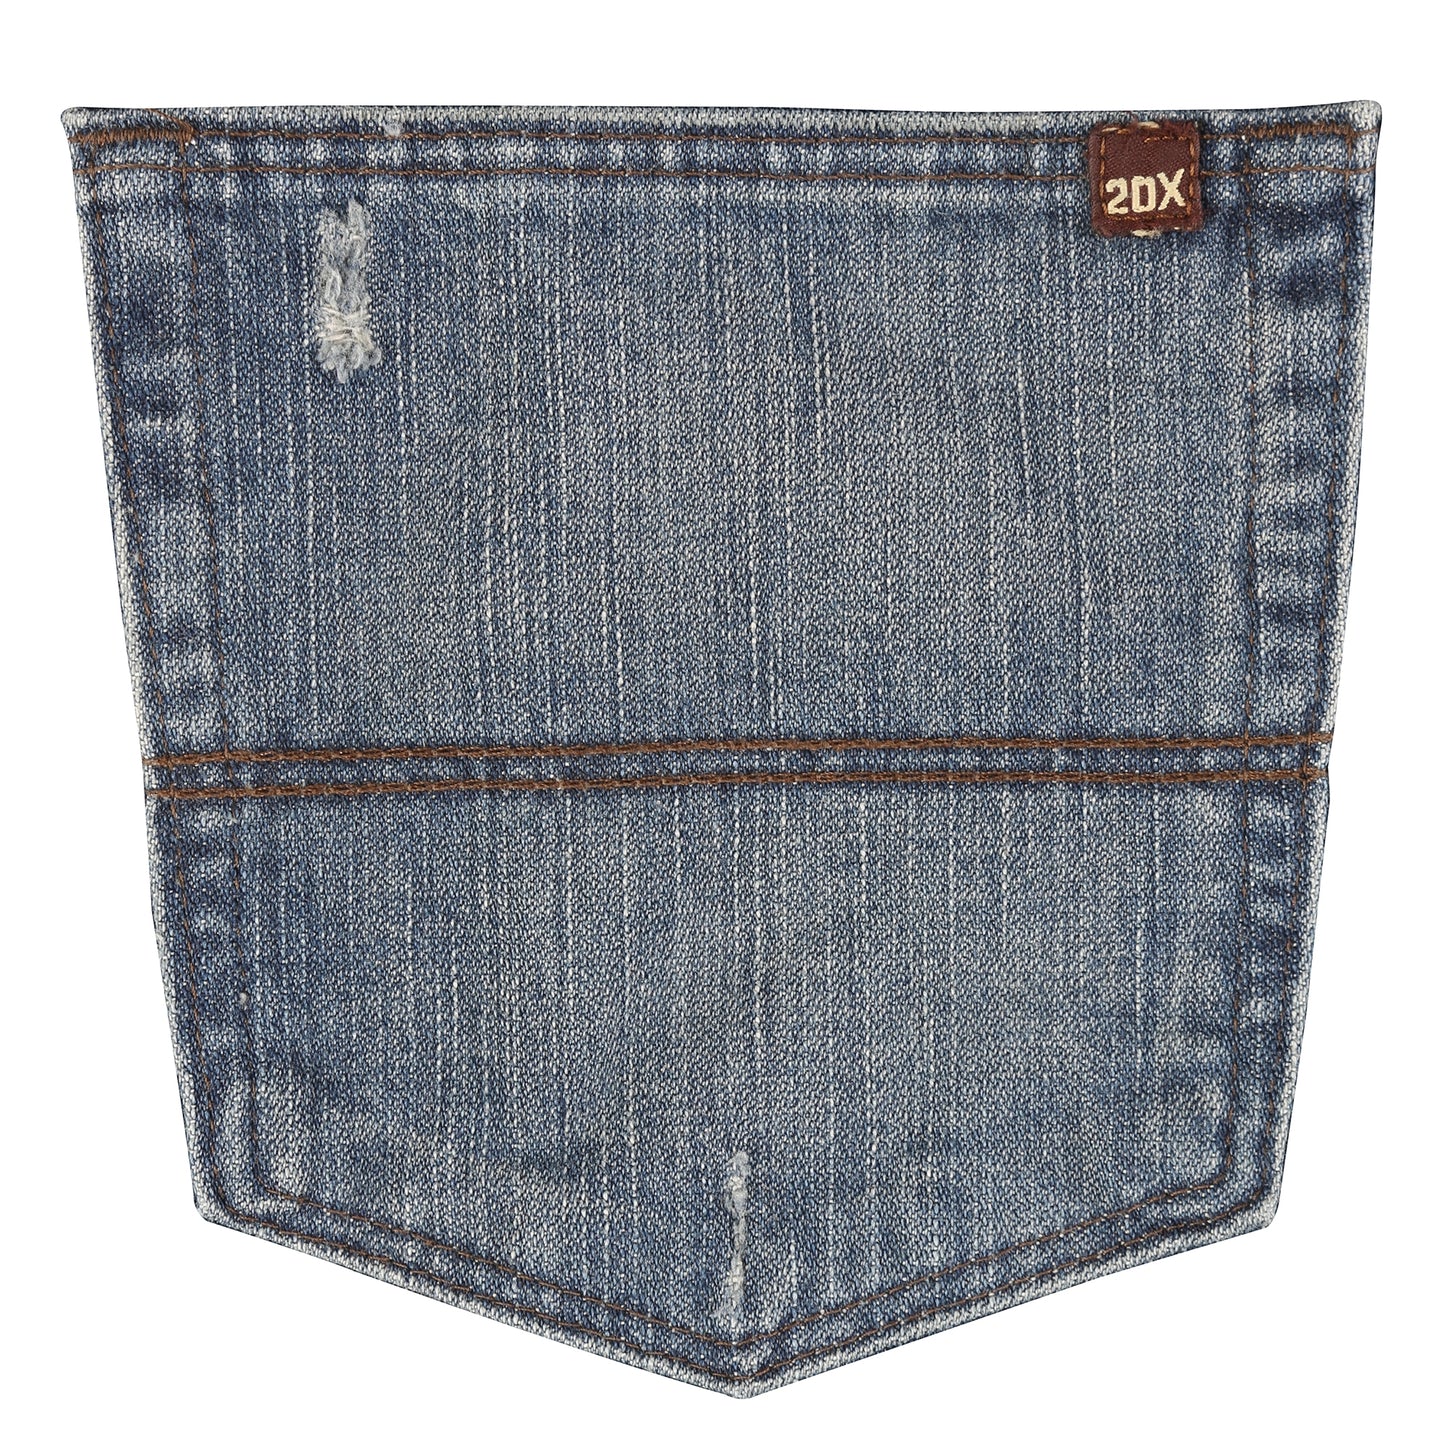 Wrangler® 20X® No. 33 Extreme Relaxed Fit Jean